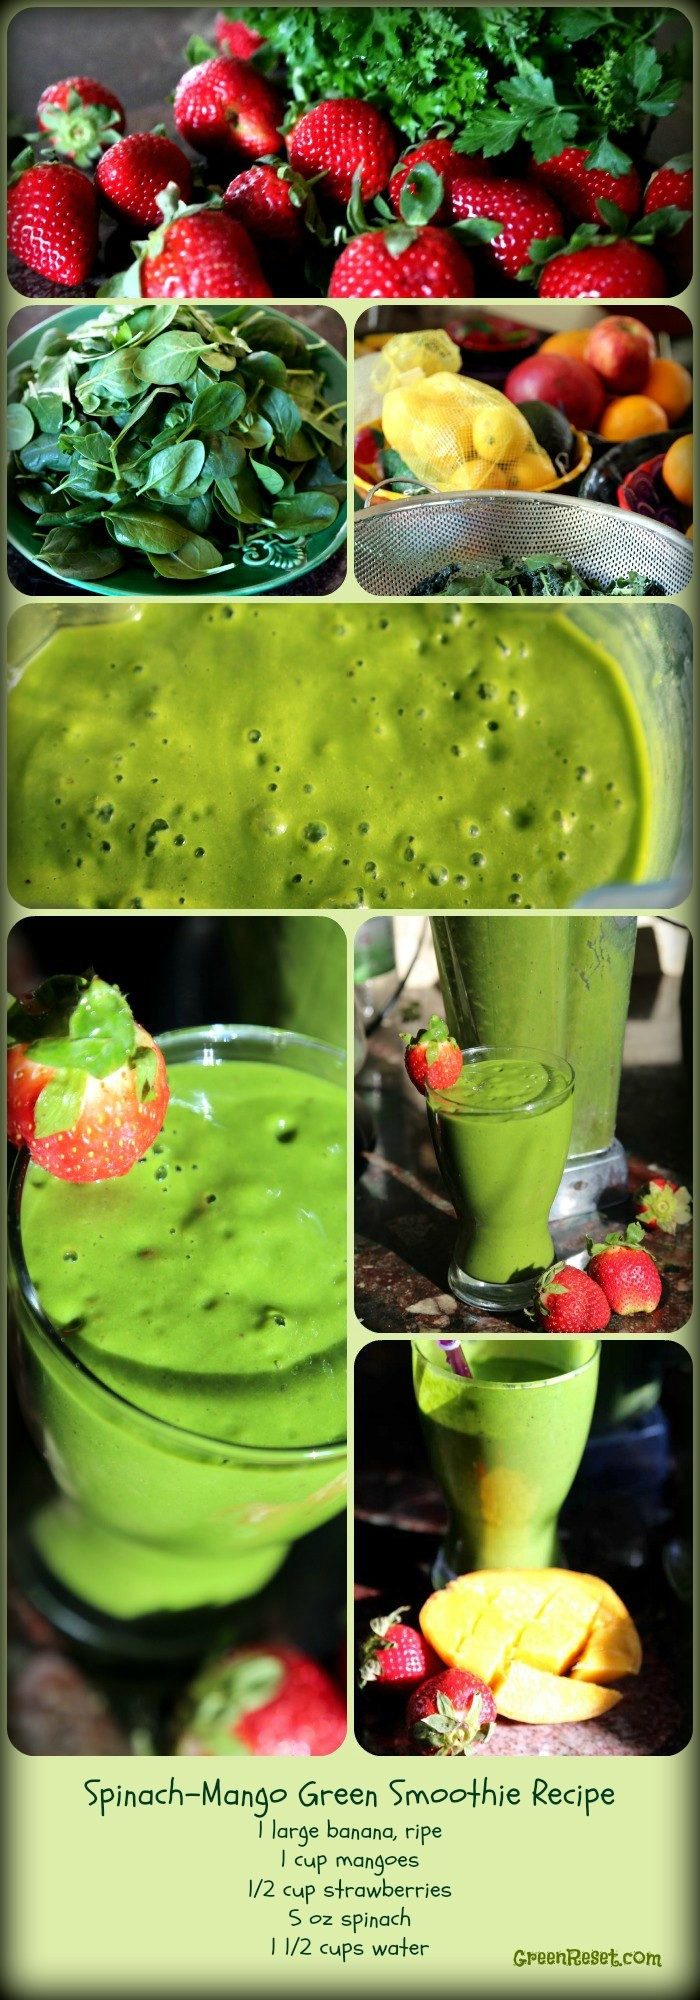 Are Green Smoothies Healthy
 9 Breakfast Smoothies Plus 3 More Super Healthy Breakfast